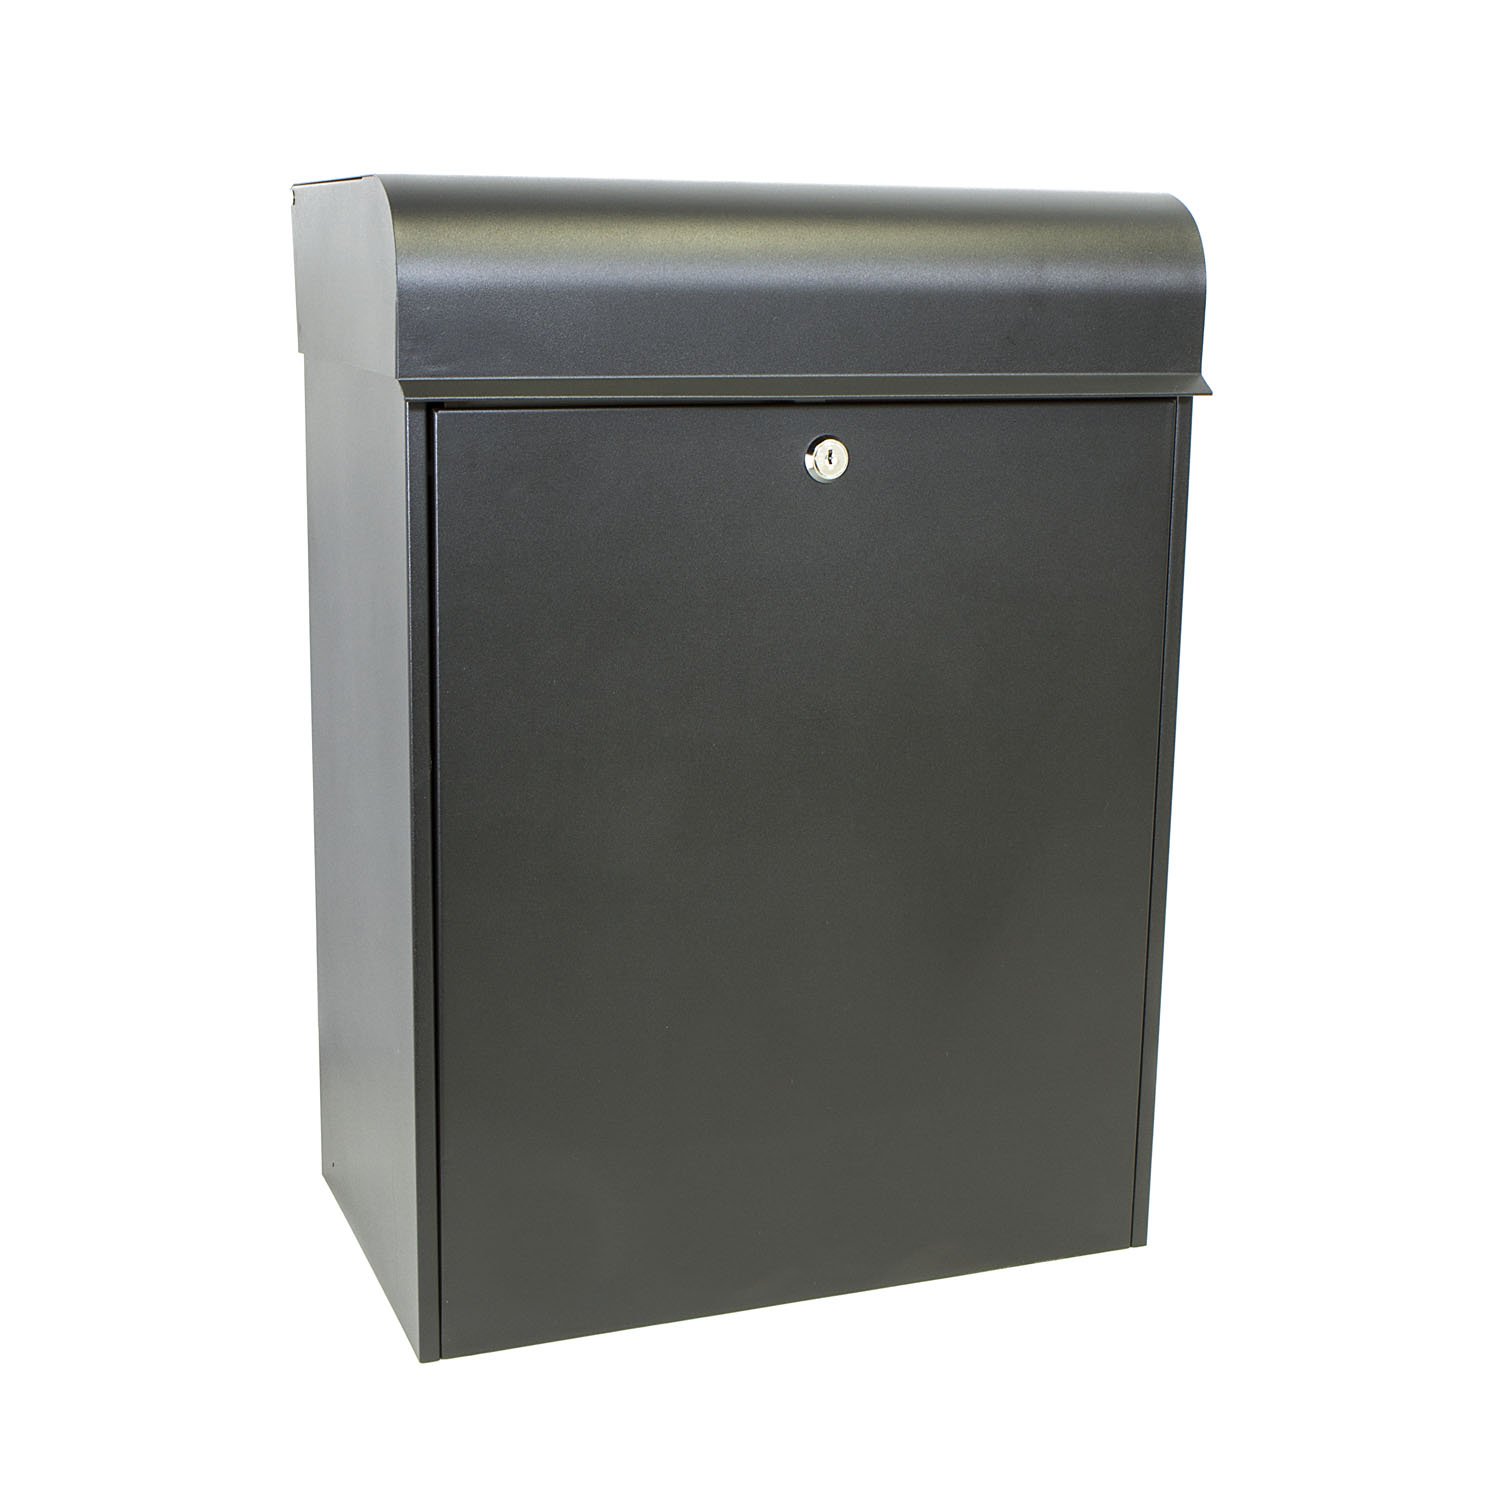 G2 By Sterling Secure Parcel Box in Black